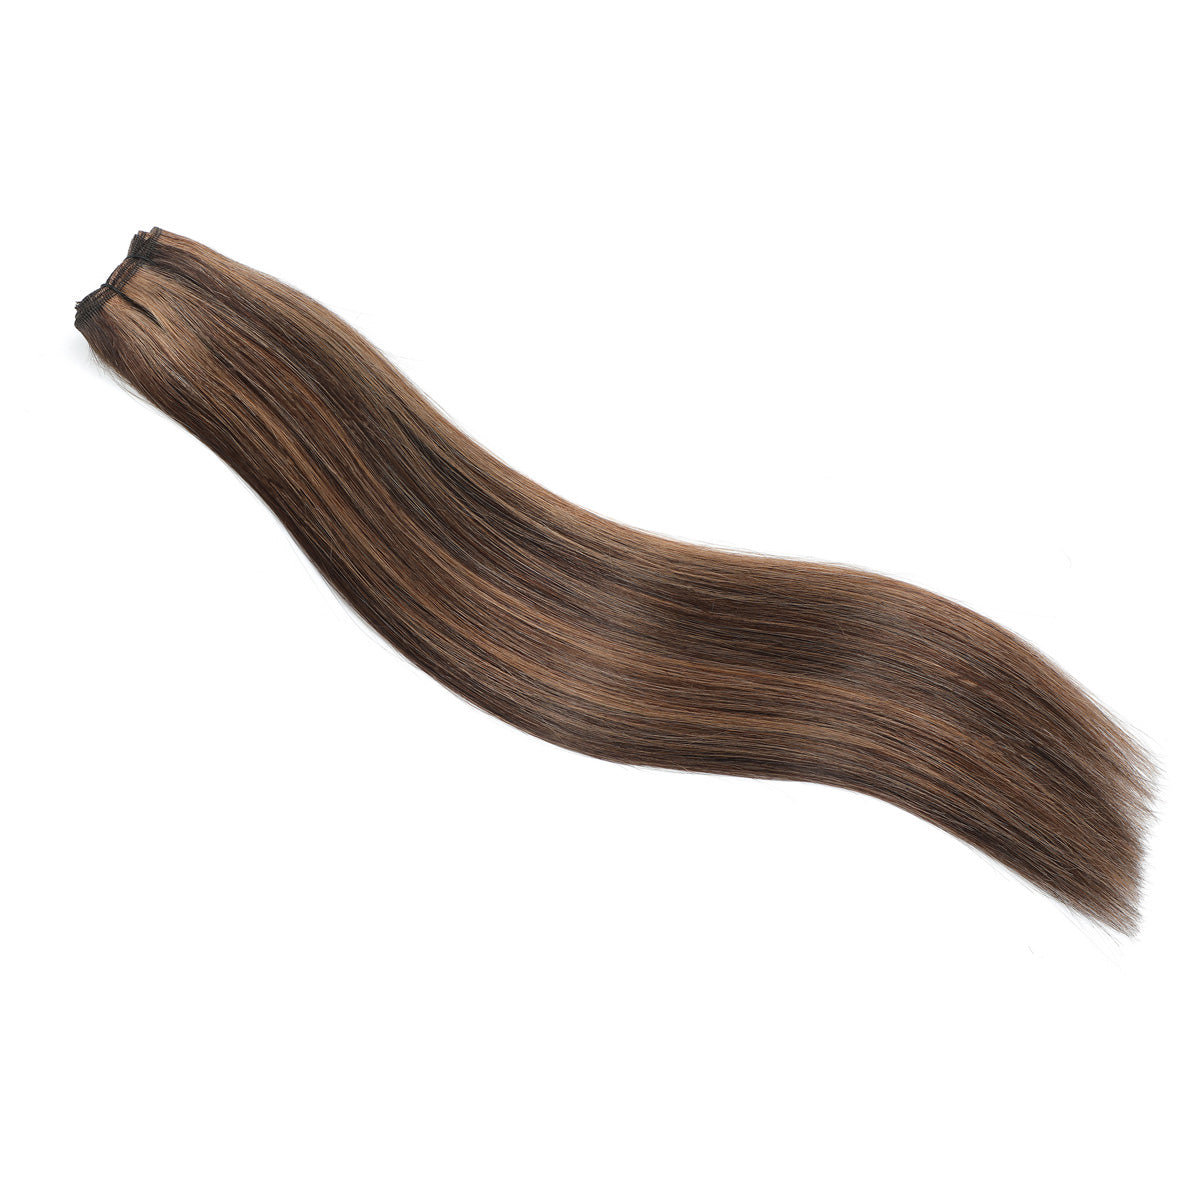 Weft Hair Extensions Caramel Brown